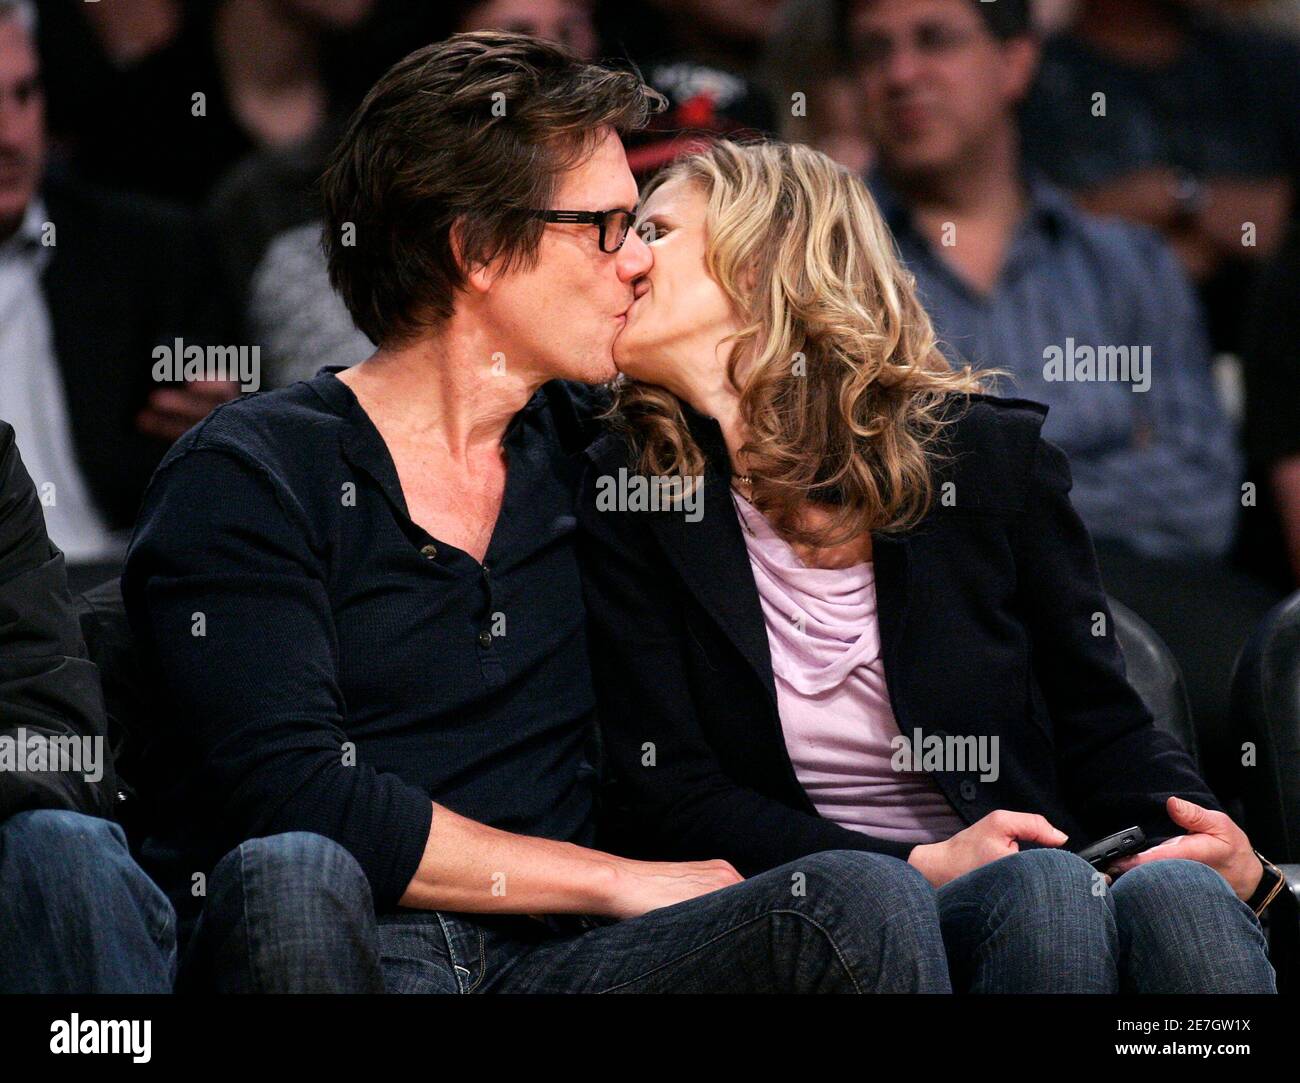 Actors Kevin Bacon (L) kisses his wife Kyra Sedgwick (R) during Game 5 of  their NBA Western Conference semi-final basketball playoff game between the  Los Angeles Lakers and the Houston Rockets in